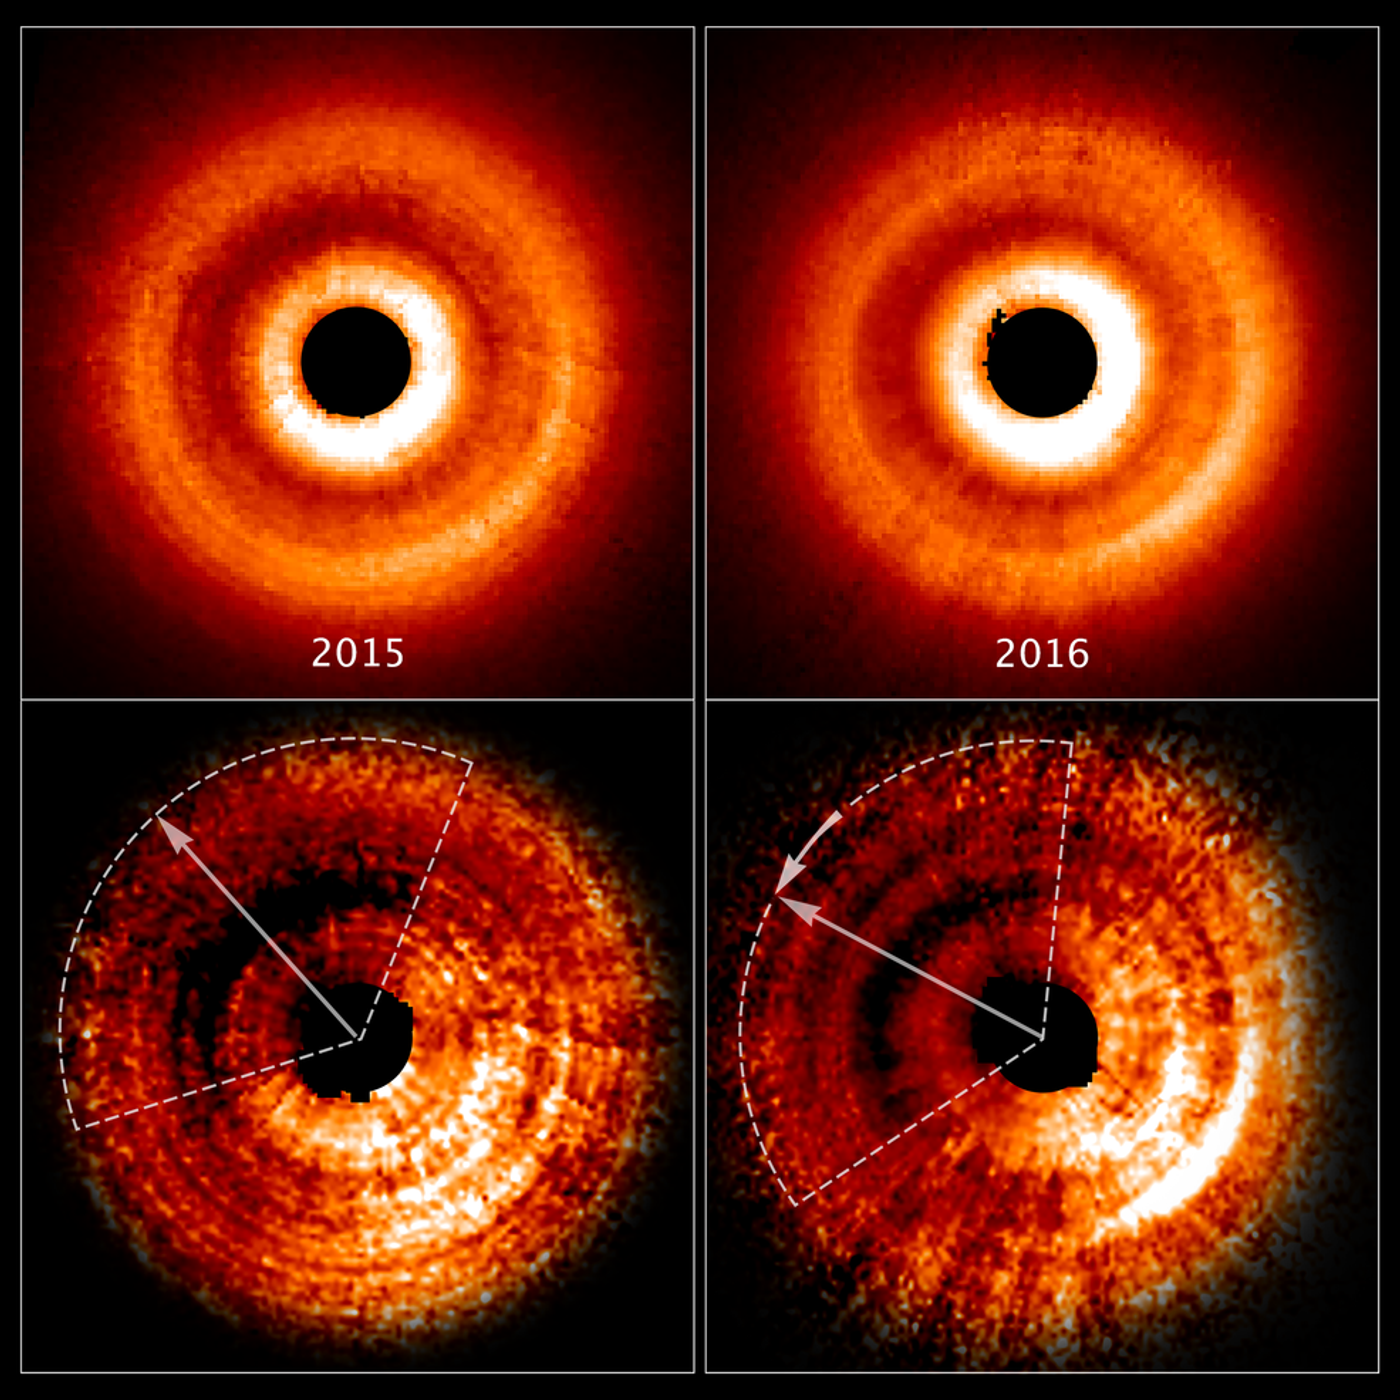 Hubble's direct images show the distortion of the gas disk thanks to the unseen planet.